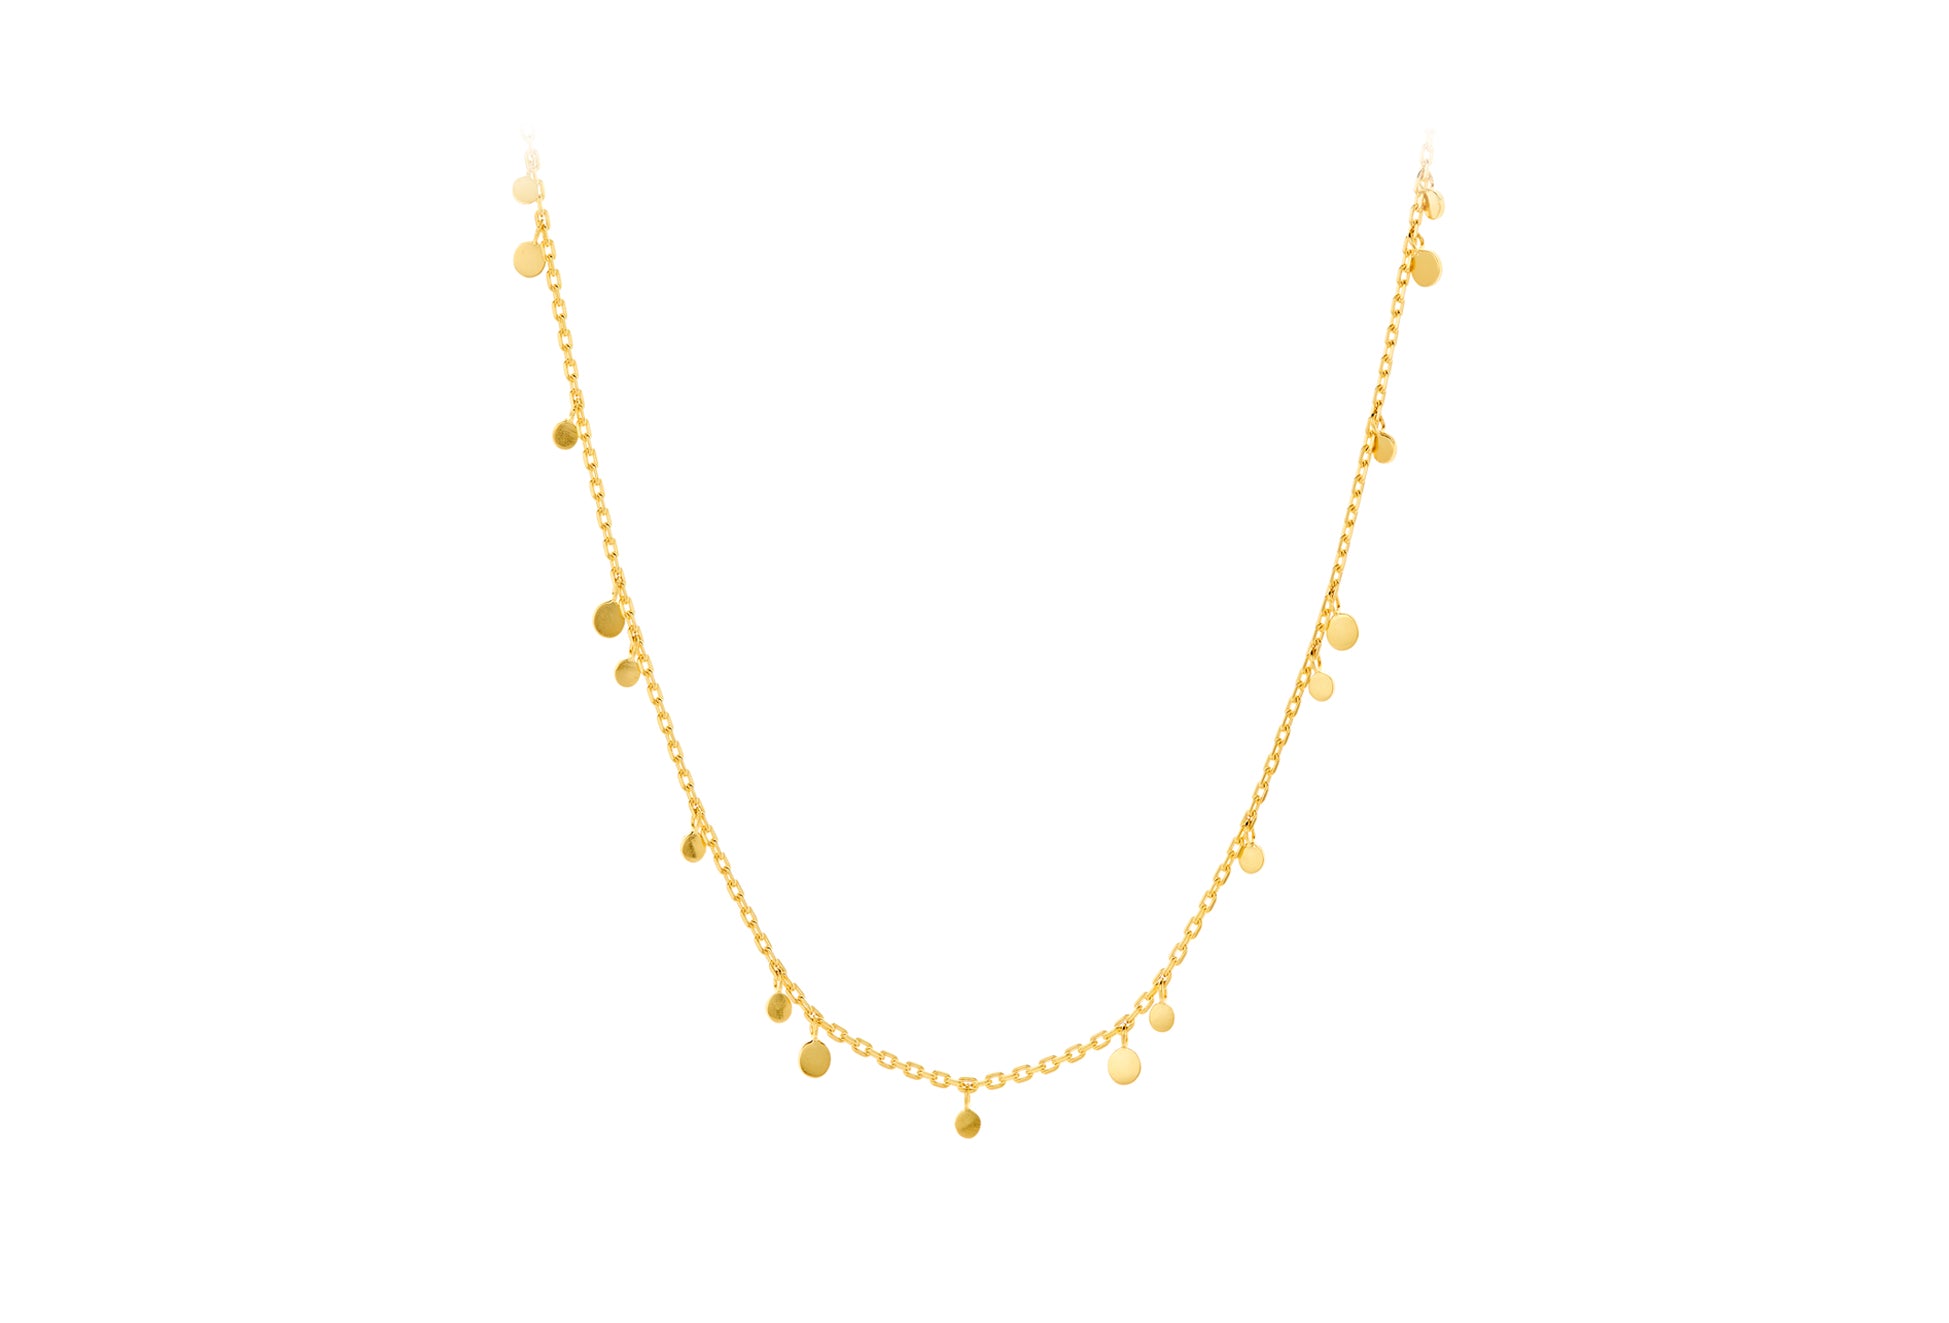 Pernille Corydon Glow Necklace in Gold